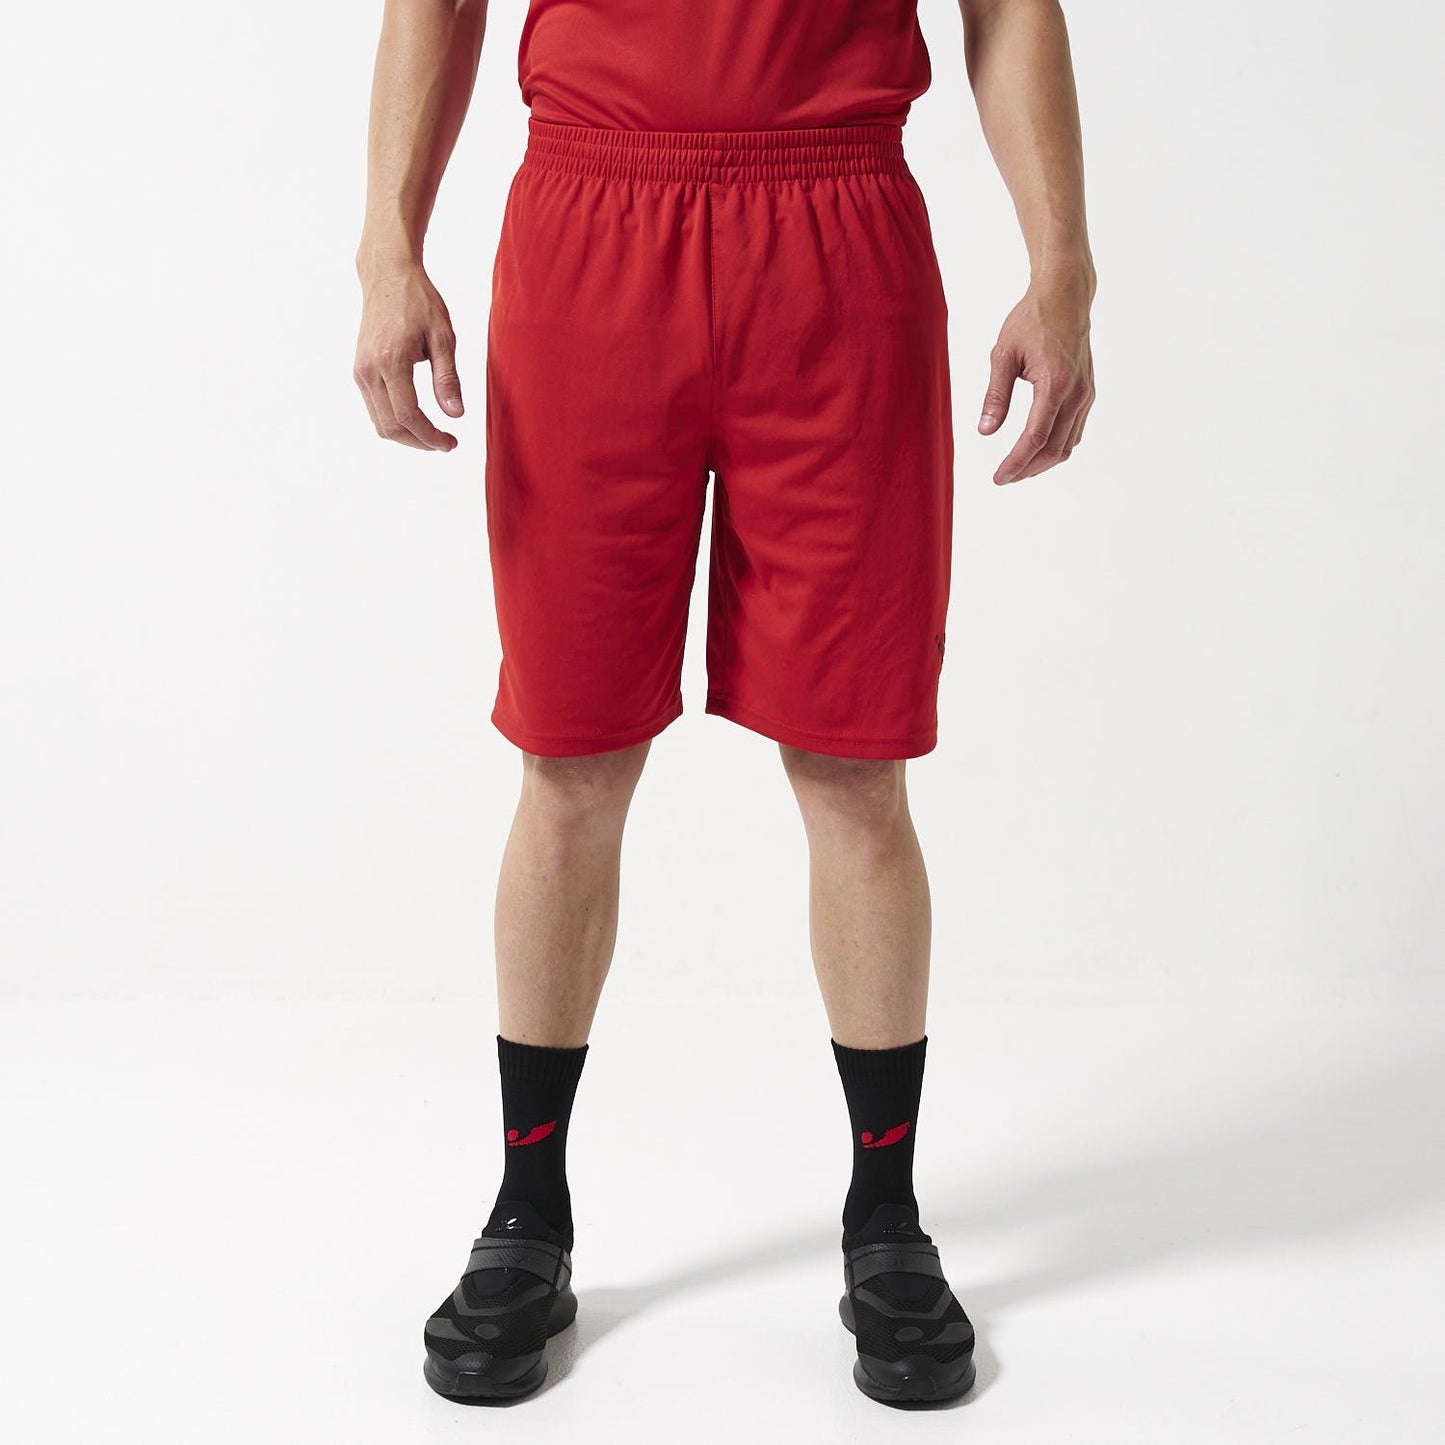 Concave Performance Shorts - Red/Black